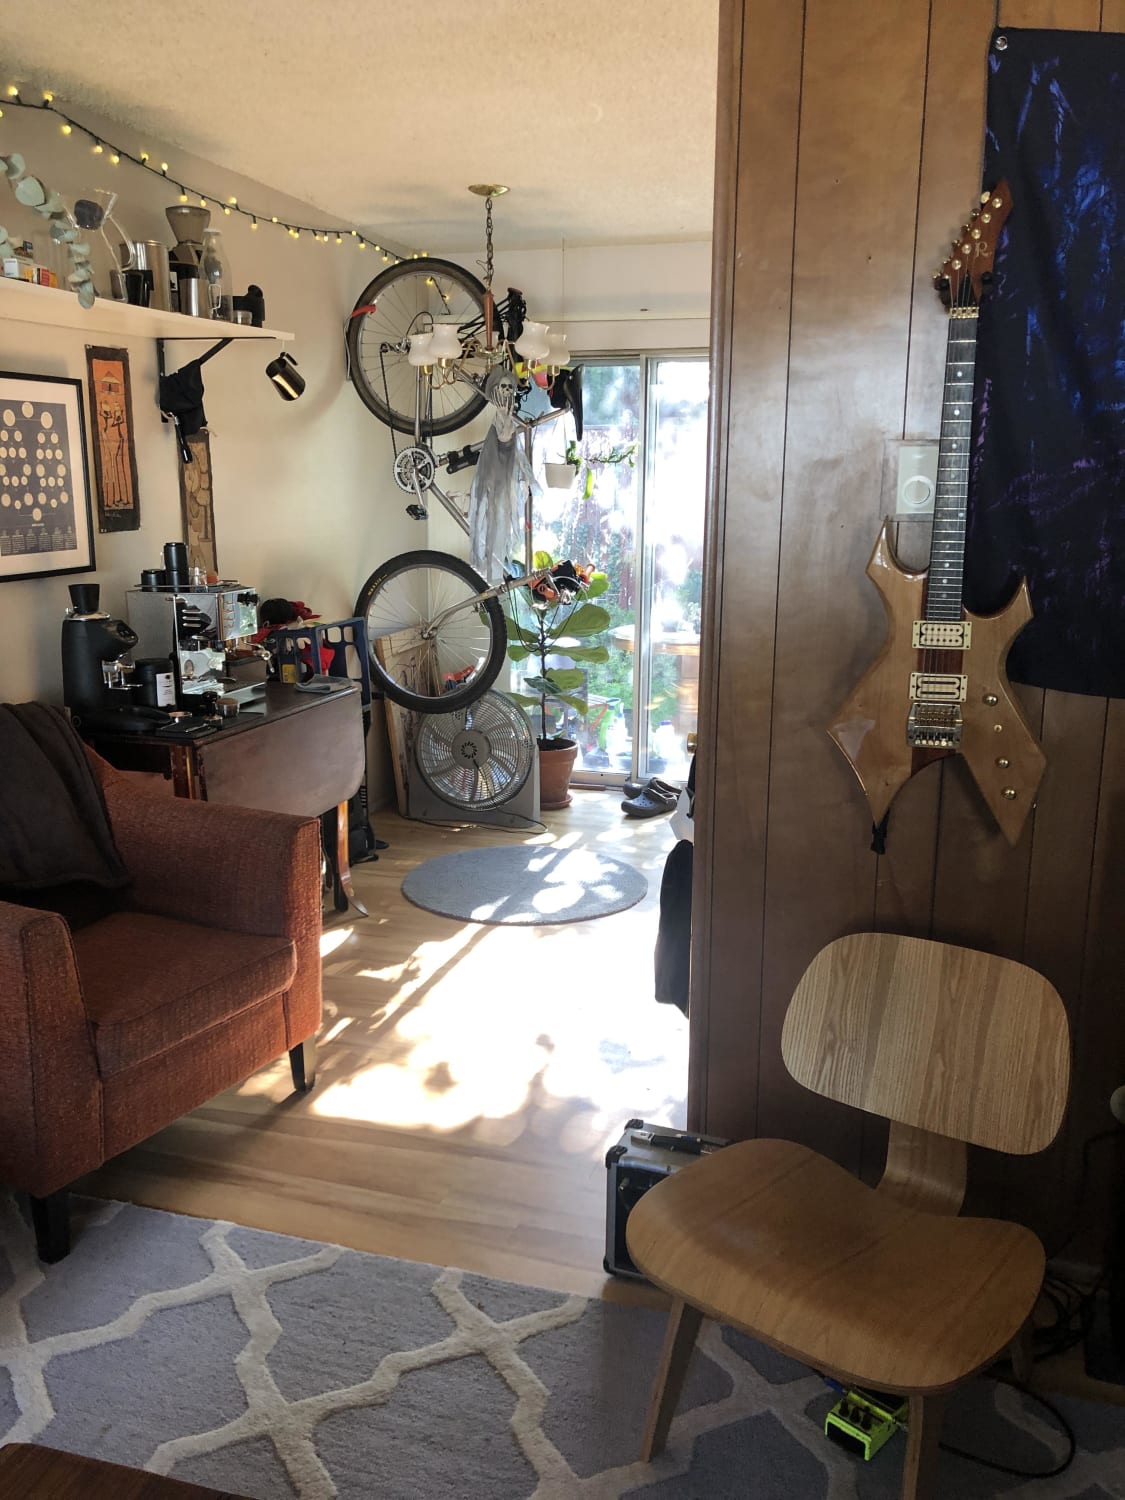 r/guitars told me you all might like this space. These are a few of my favorite things.